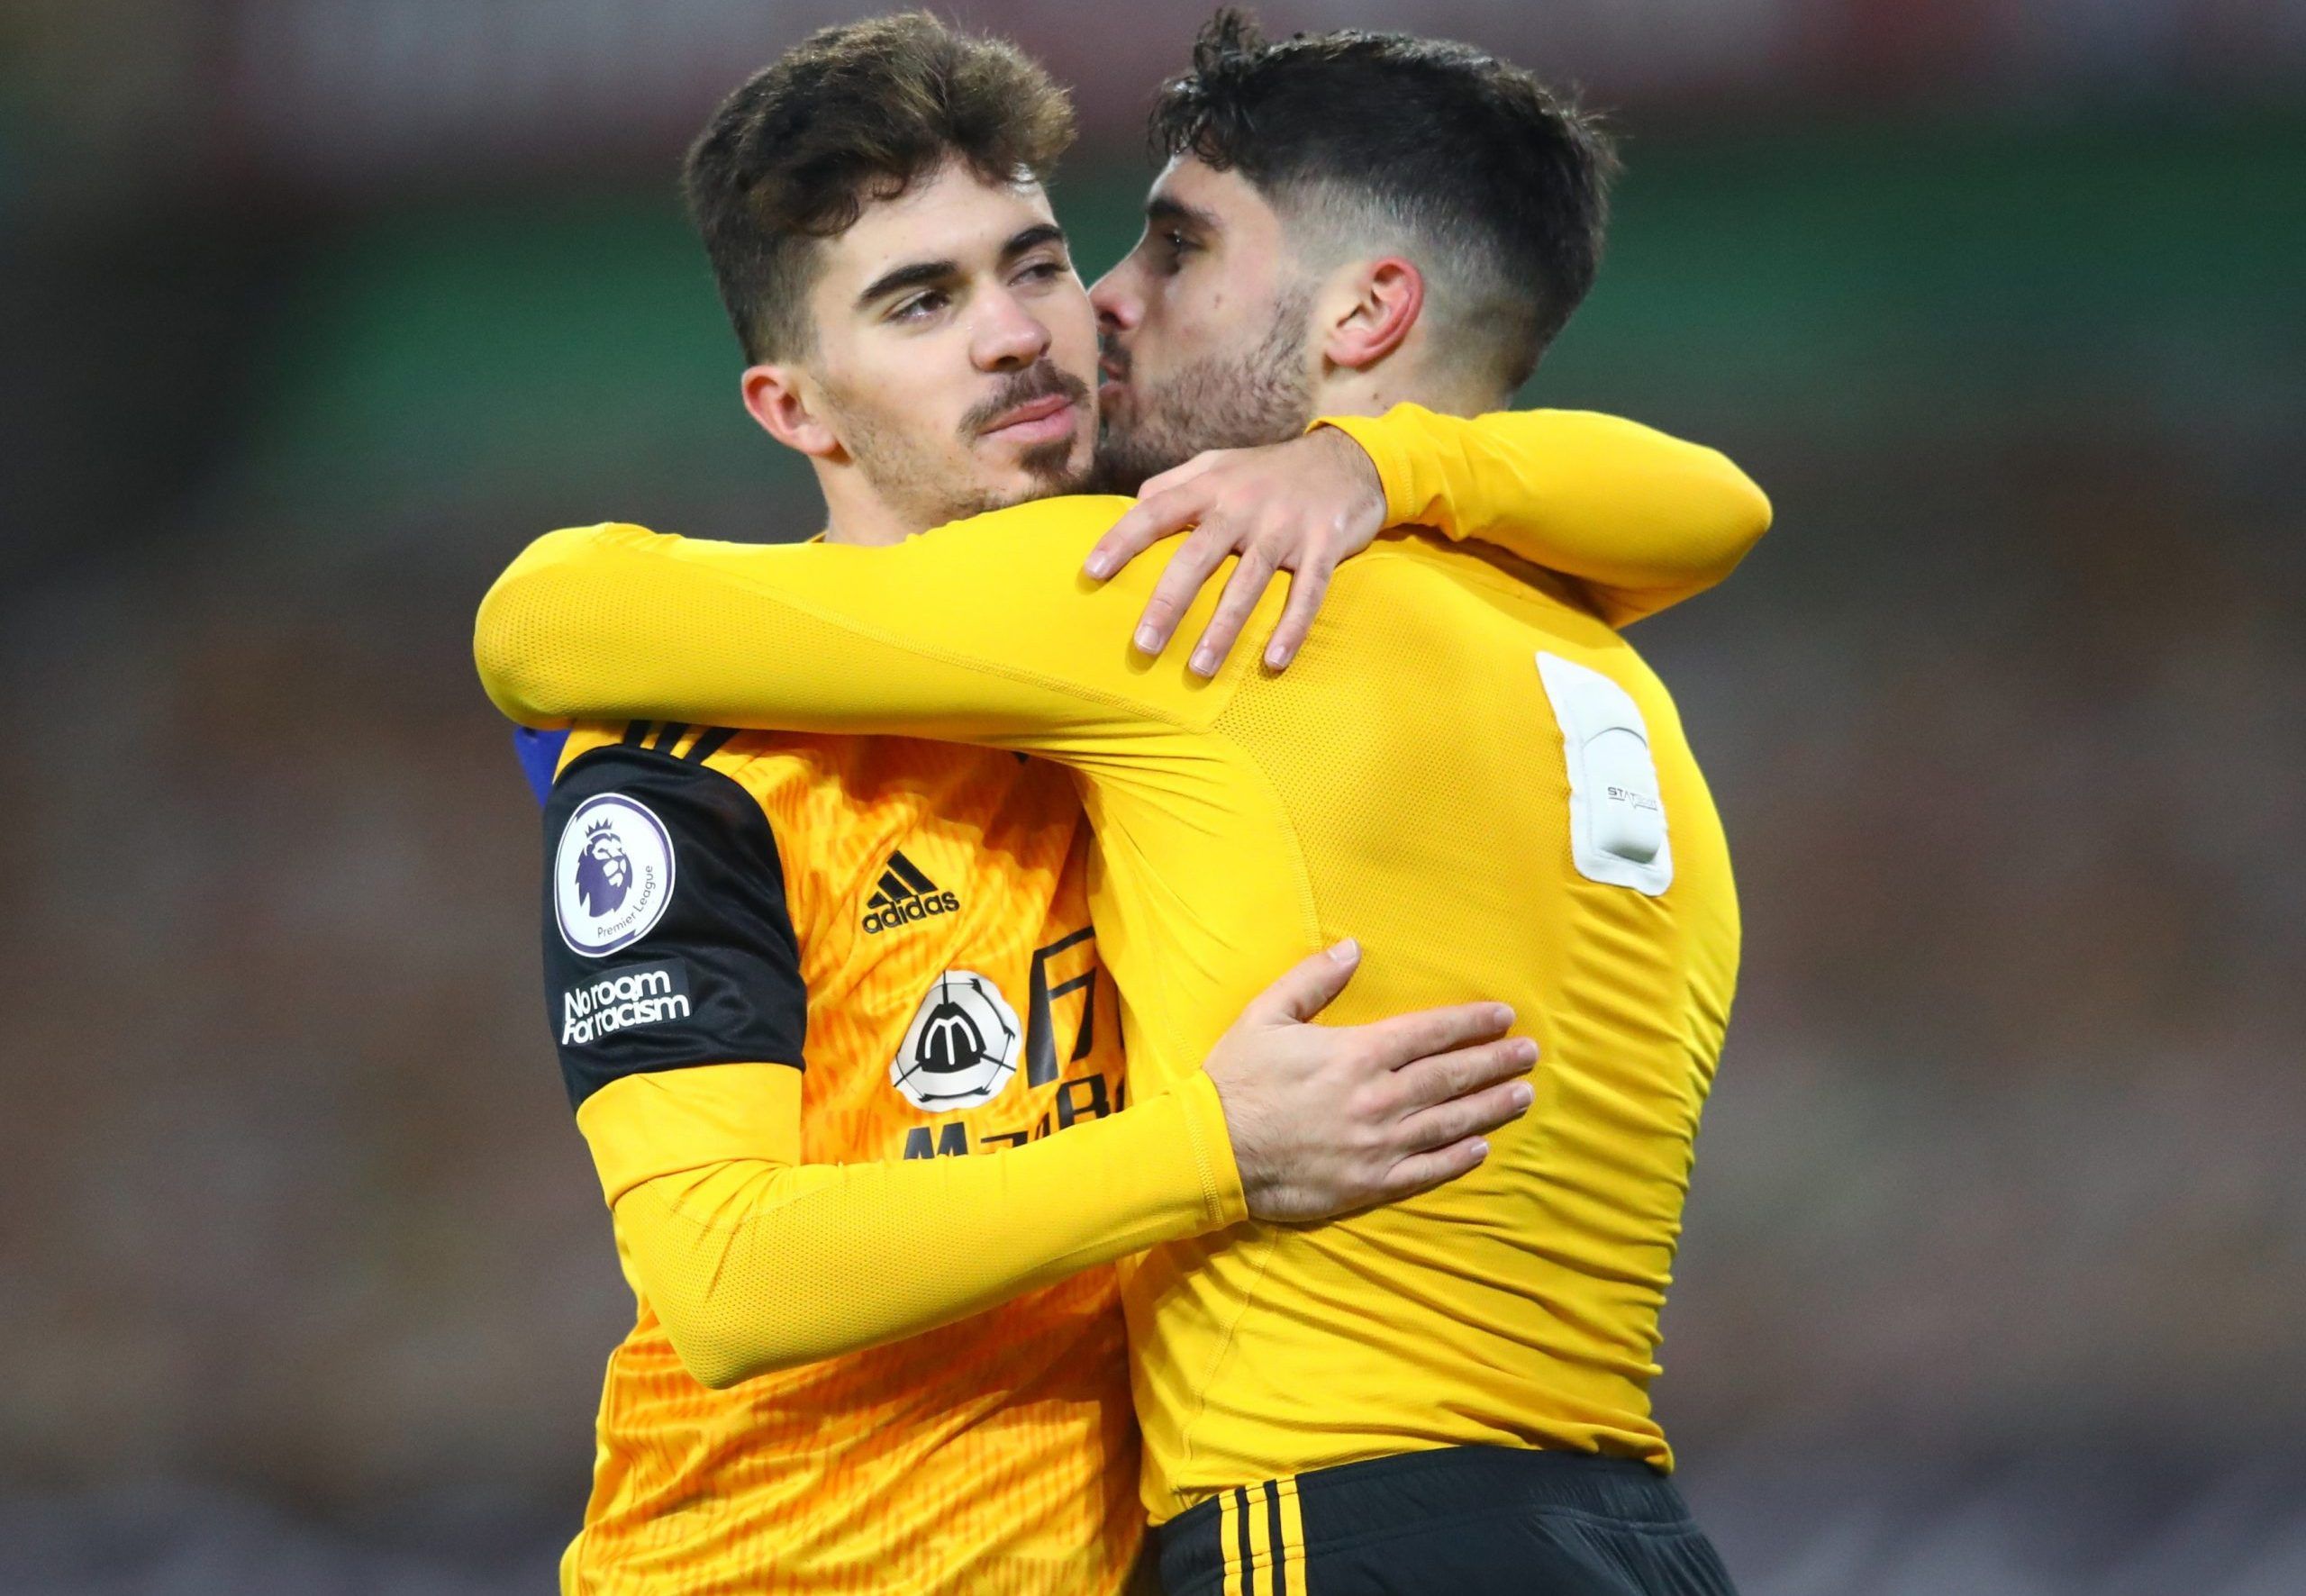 Bruno Lage, Fosun, Jeff Shi, Molineux, The Old Gold, Wolves, Wolves fans, Wolves info, Wolves latest, Wolves news, Wolves updates, WWFC, WWFC news, WWFC update, Premier League, Premier League news, Wolverhampton Wanderers, Market Movers, Vitinha, Porto, 
